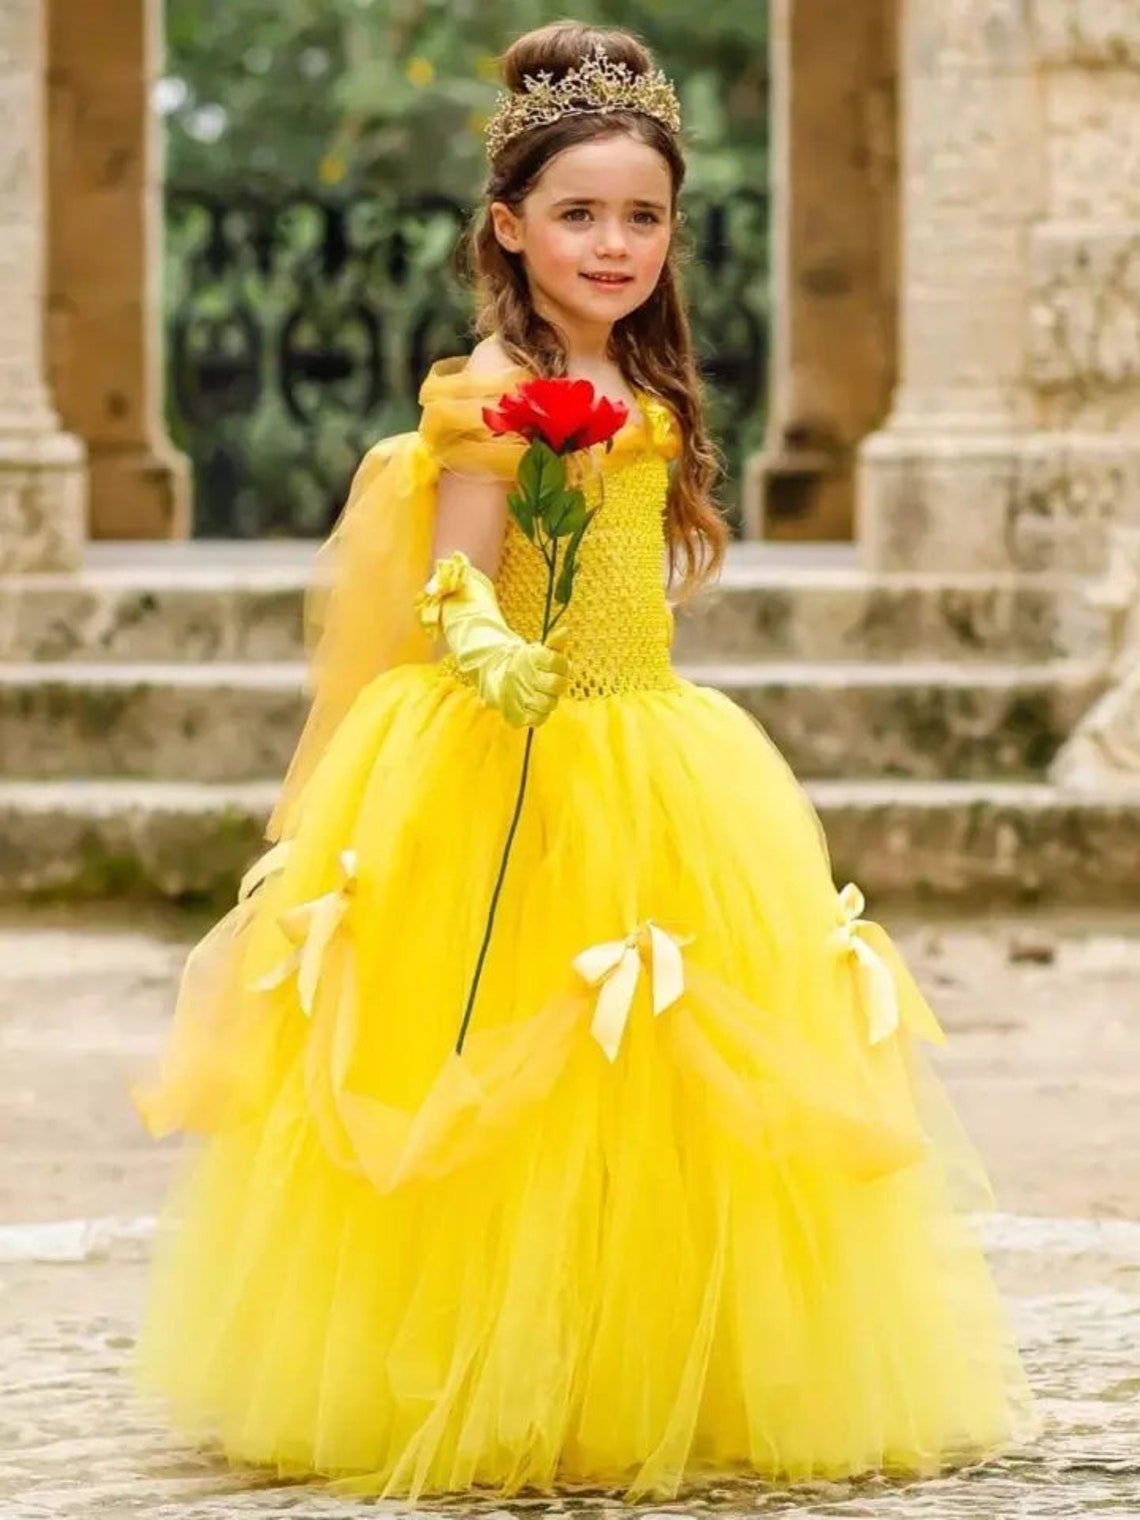 Beauty and the Beast Little Girl LED Ballgown Dress